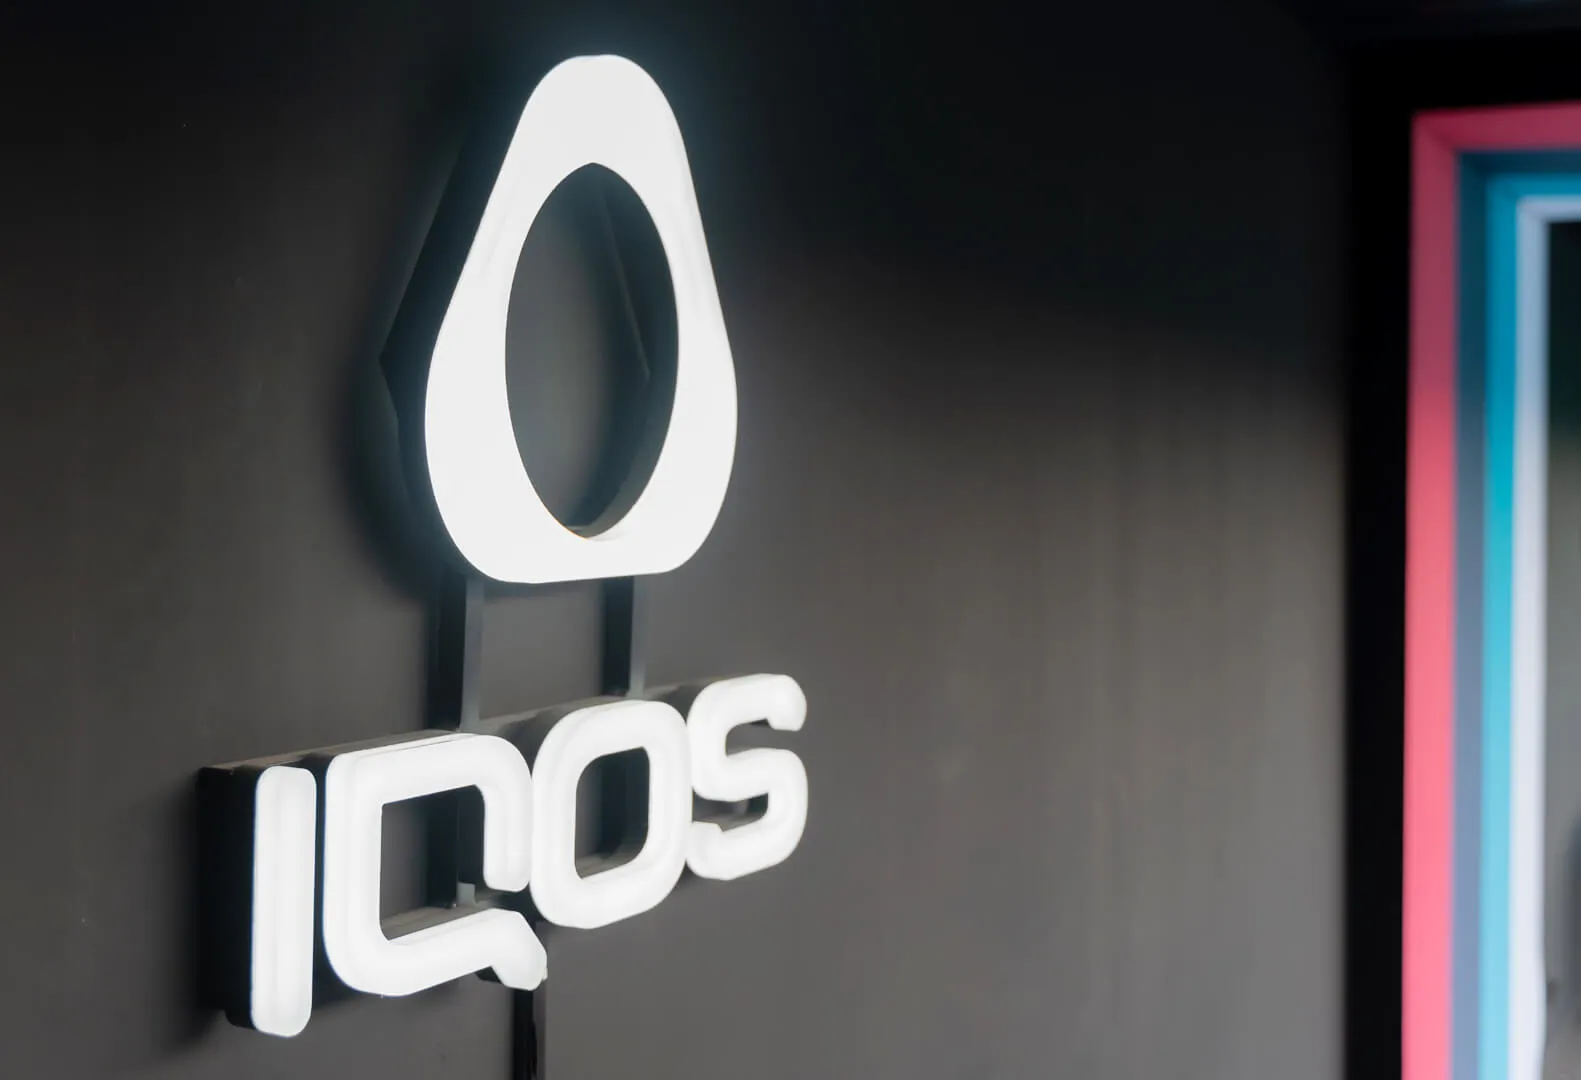 IQOS logo and lettering made of plexiglass, backlit in white